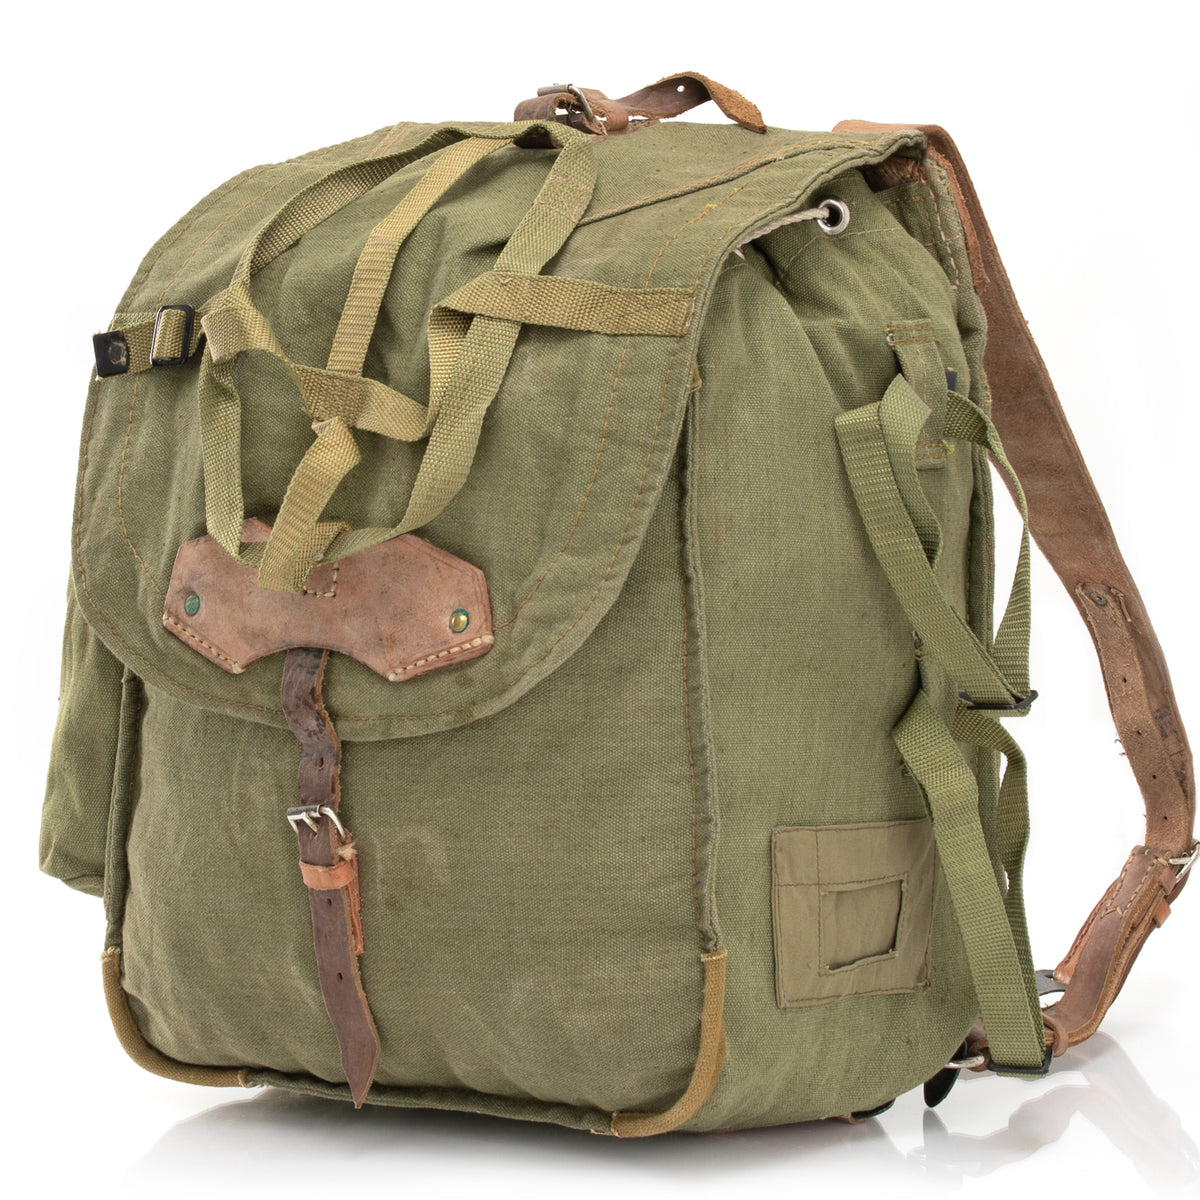 Romanian Military Canvas Backpack with Helmet Straps